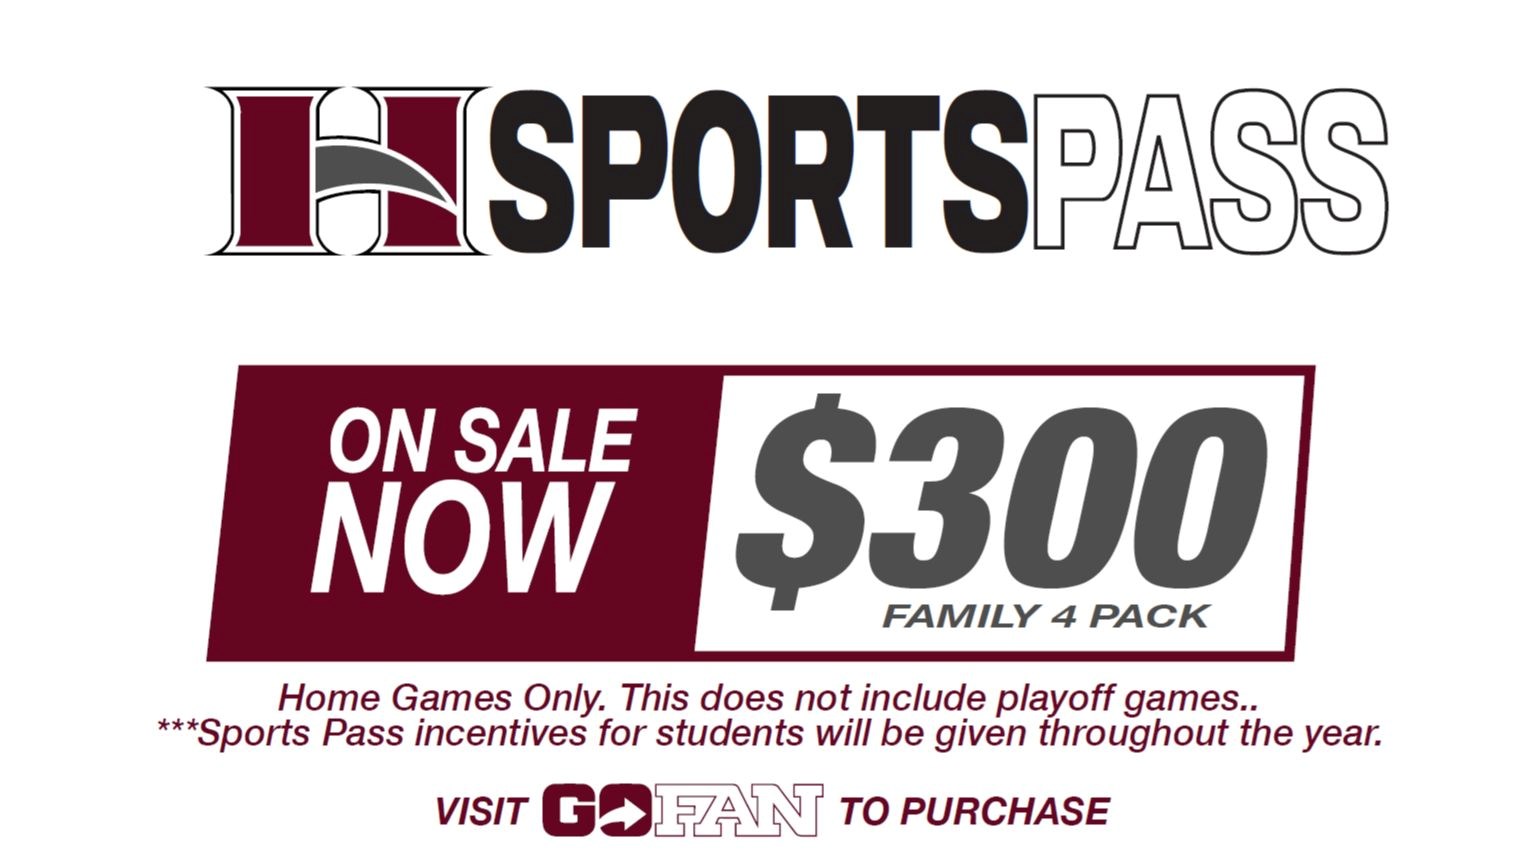 Hillgrove Family Sports Pass On Sale Now